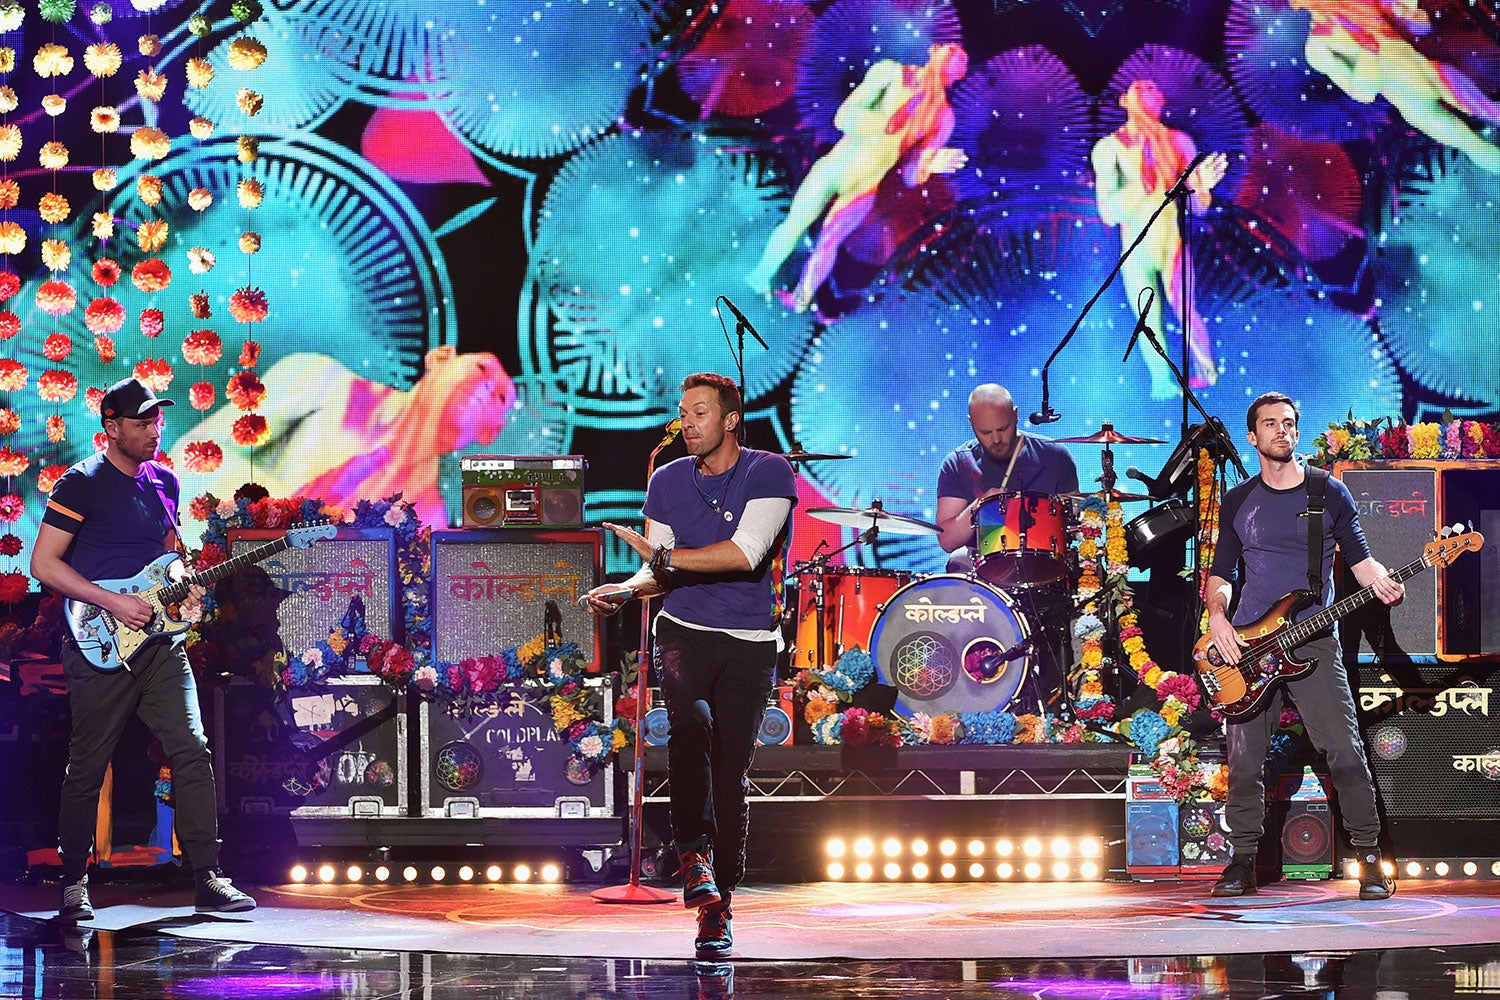 coldplay wallpaper,performance,entertainment,drums,musician,drum